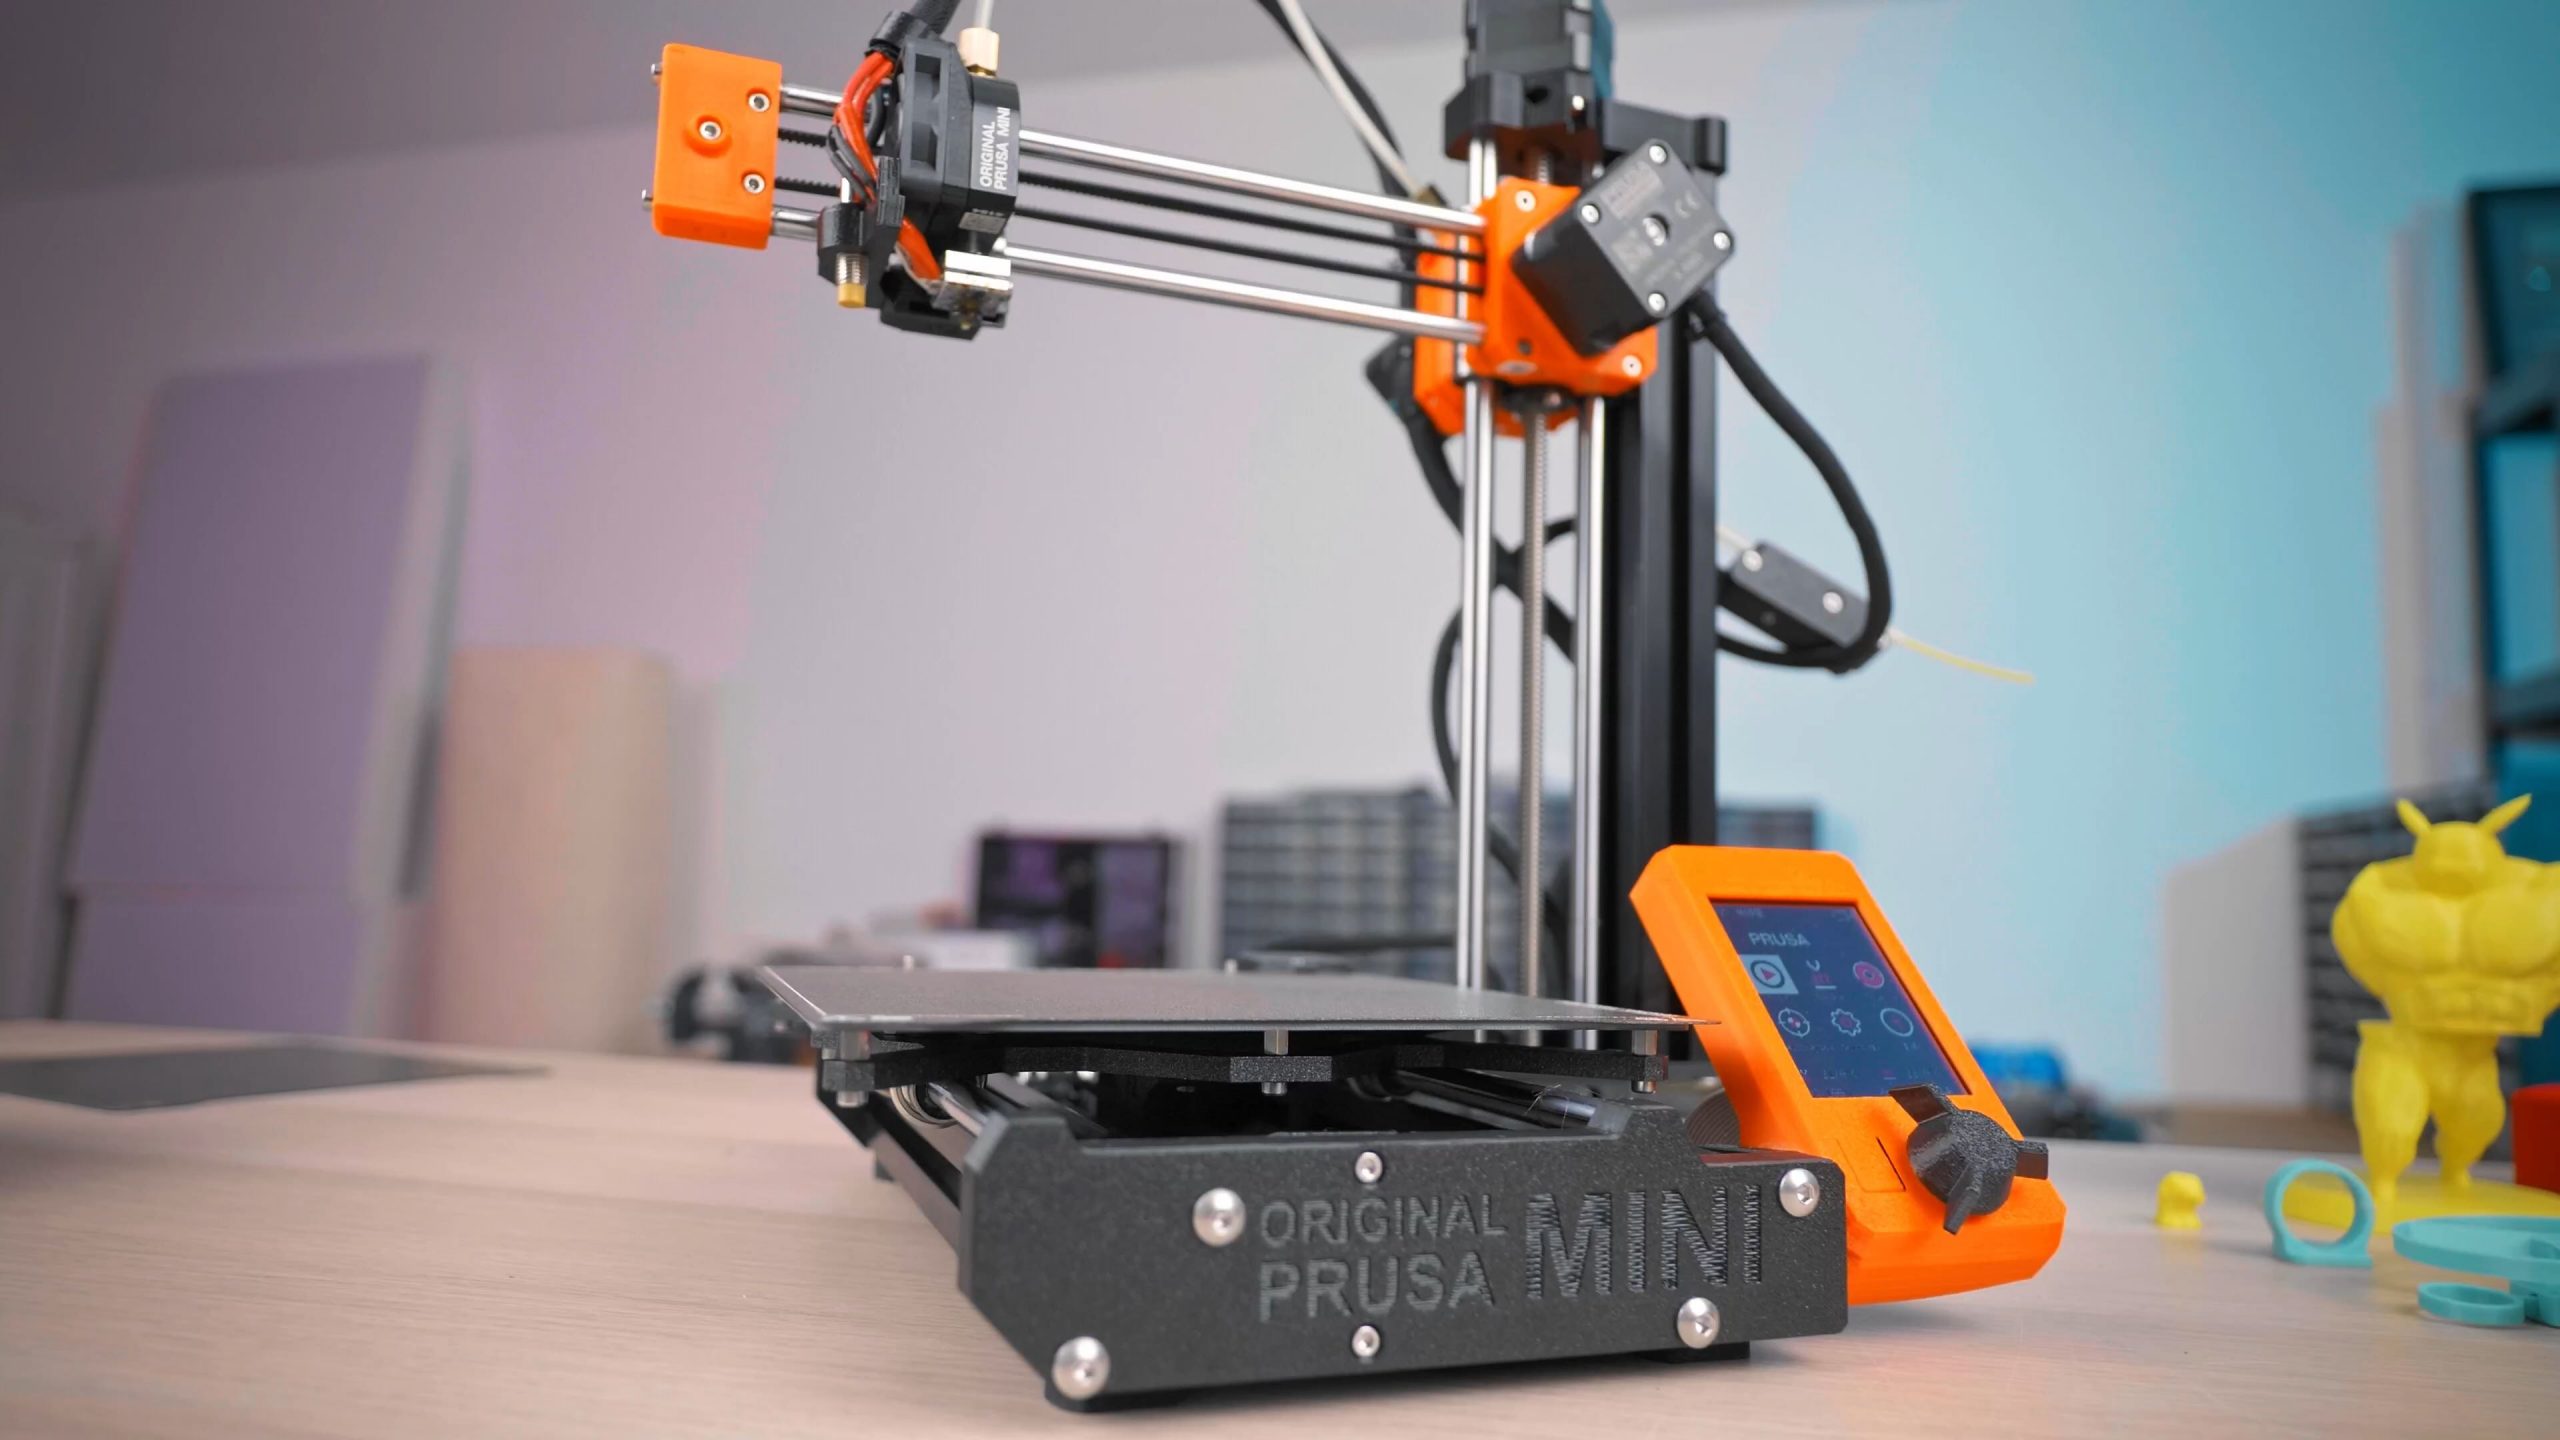 The next “BIG” thing: Prusa Mini Review – Tom's 3D printing guides